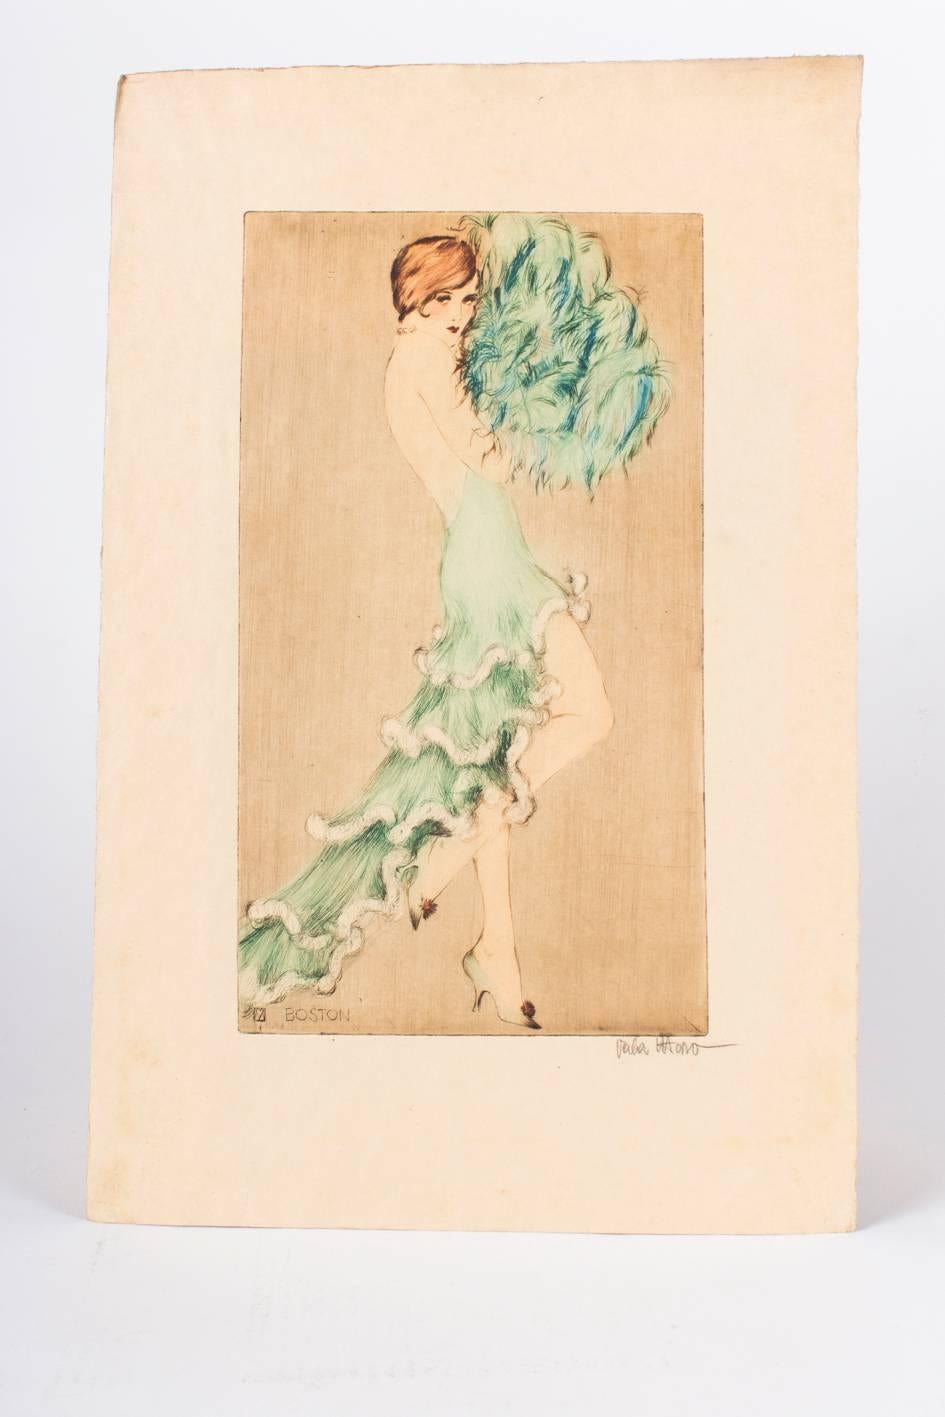 Vala Moro (1907), Vienna 
Art Deco dancing nude “Boston”, circa 1924 
Original colored etching, pencil-signed lower right “Vala Moro” and monogrammed in etching, titled “BOSTON”

Vala Moro was an Austrian-Hungarian dancer and artist. She lived